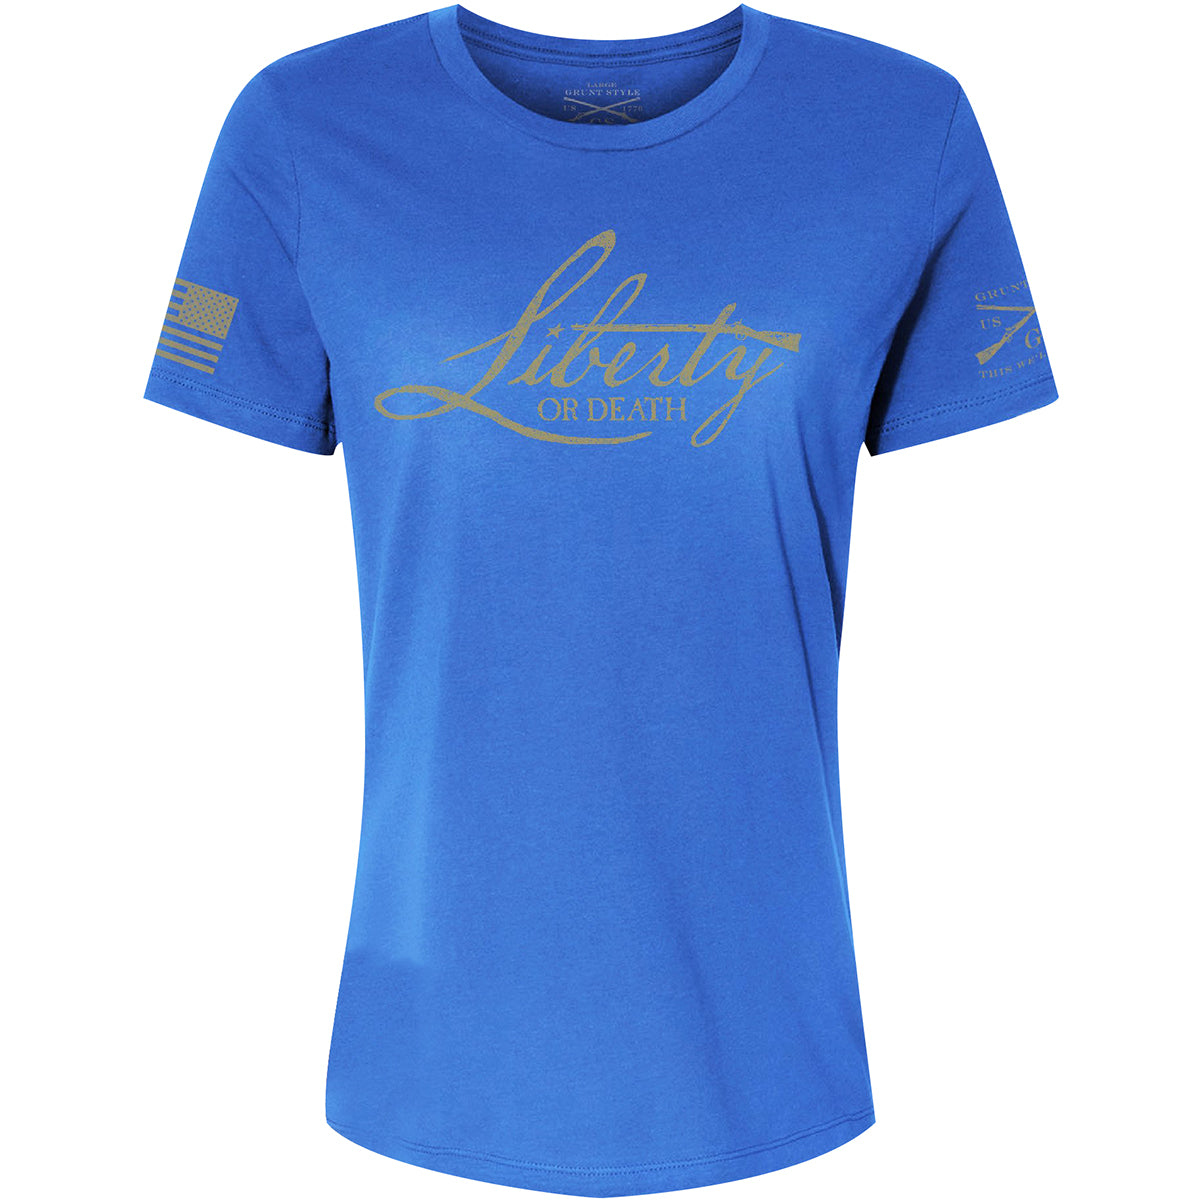 Grunt Style Women's Relaxed Fit Liberty Or Death 2.0 T-Shirt - Royal Blue Grunt Style